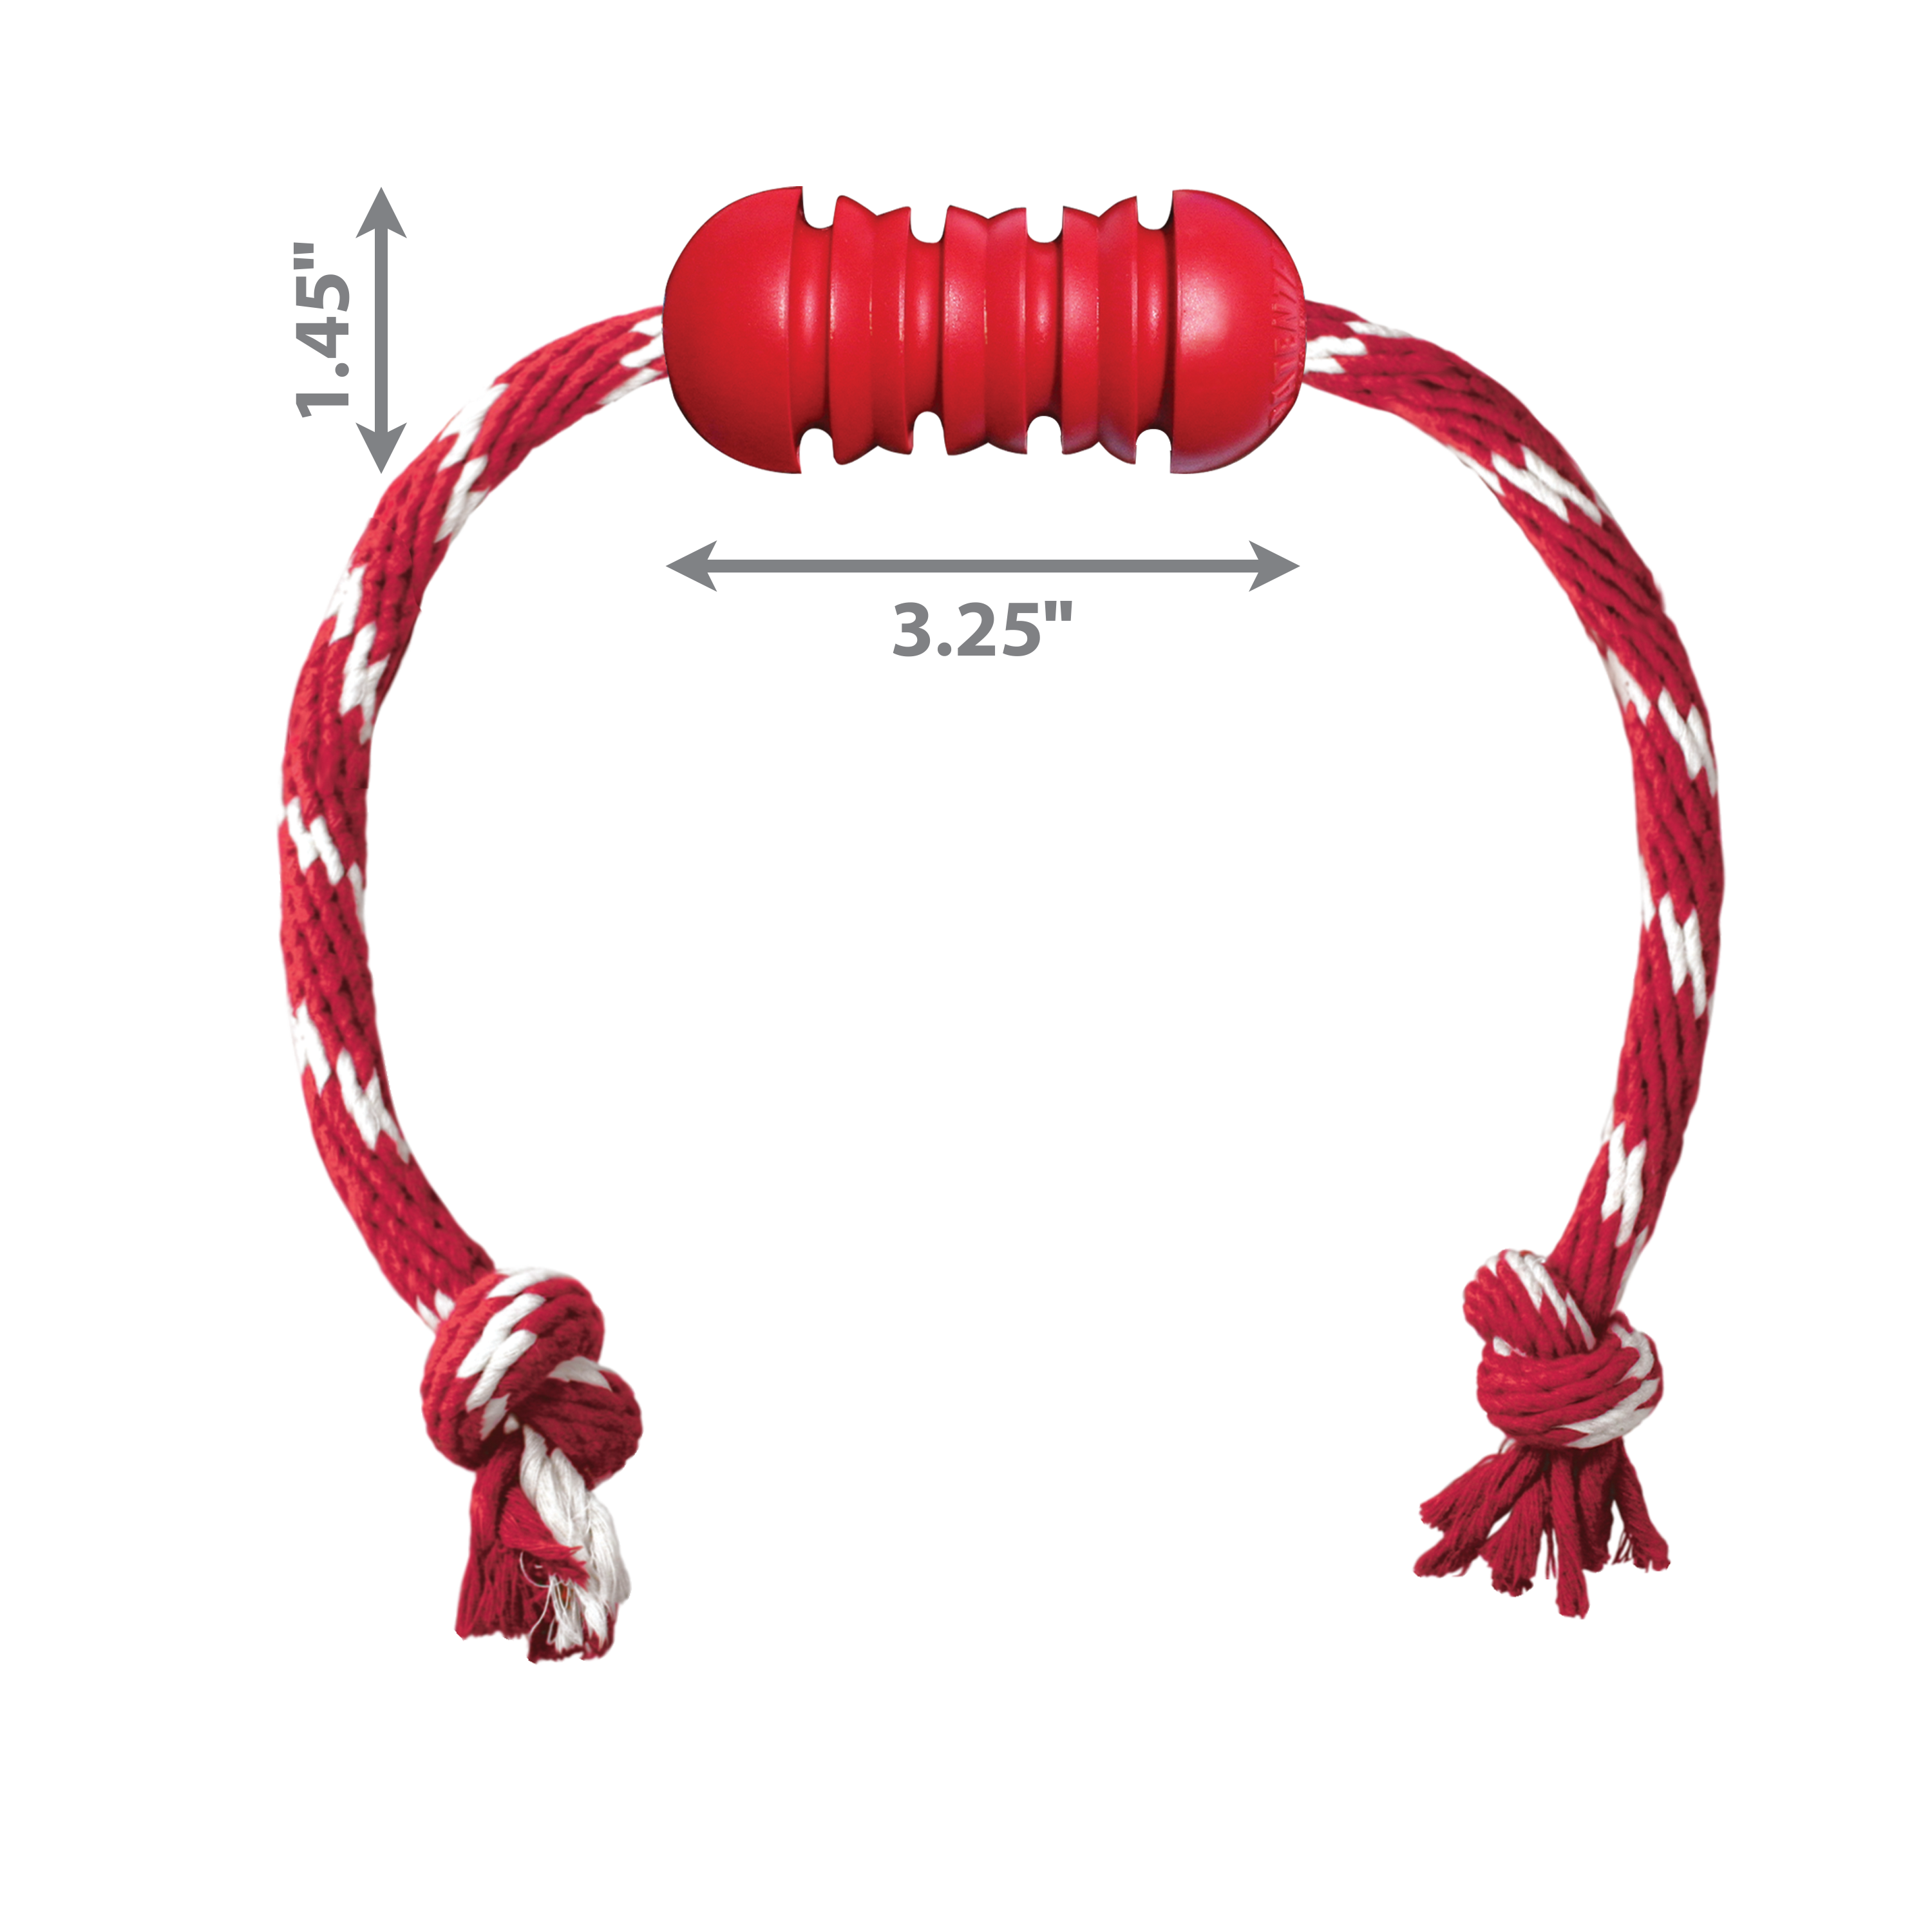 KONG Dental w/Rope dimoffpack product image